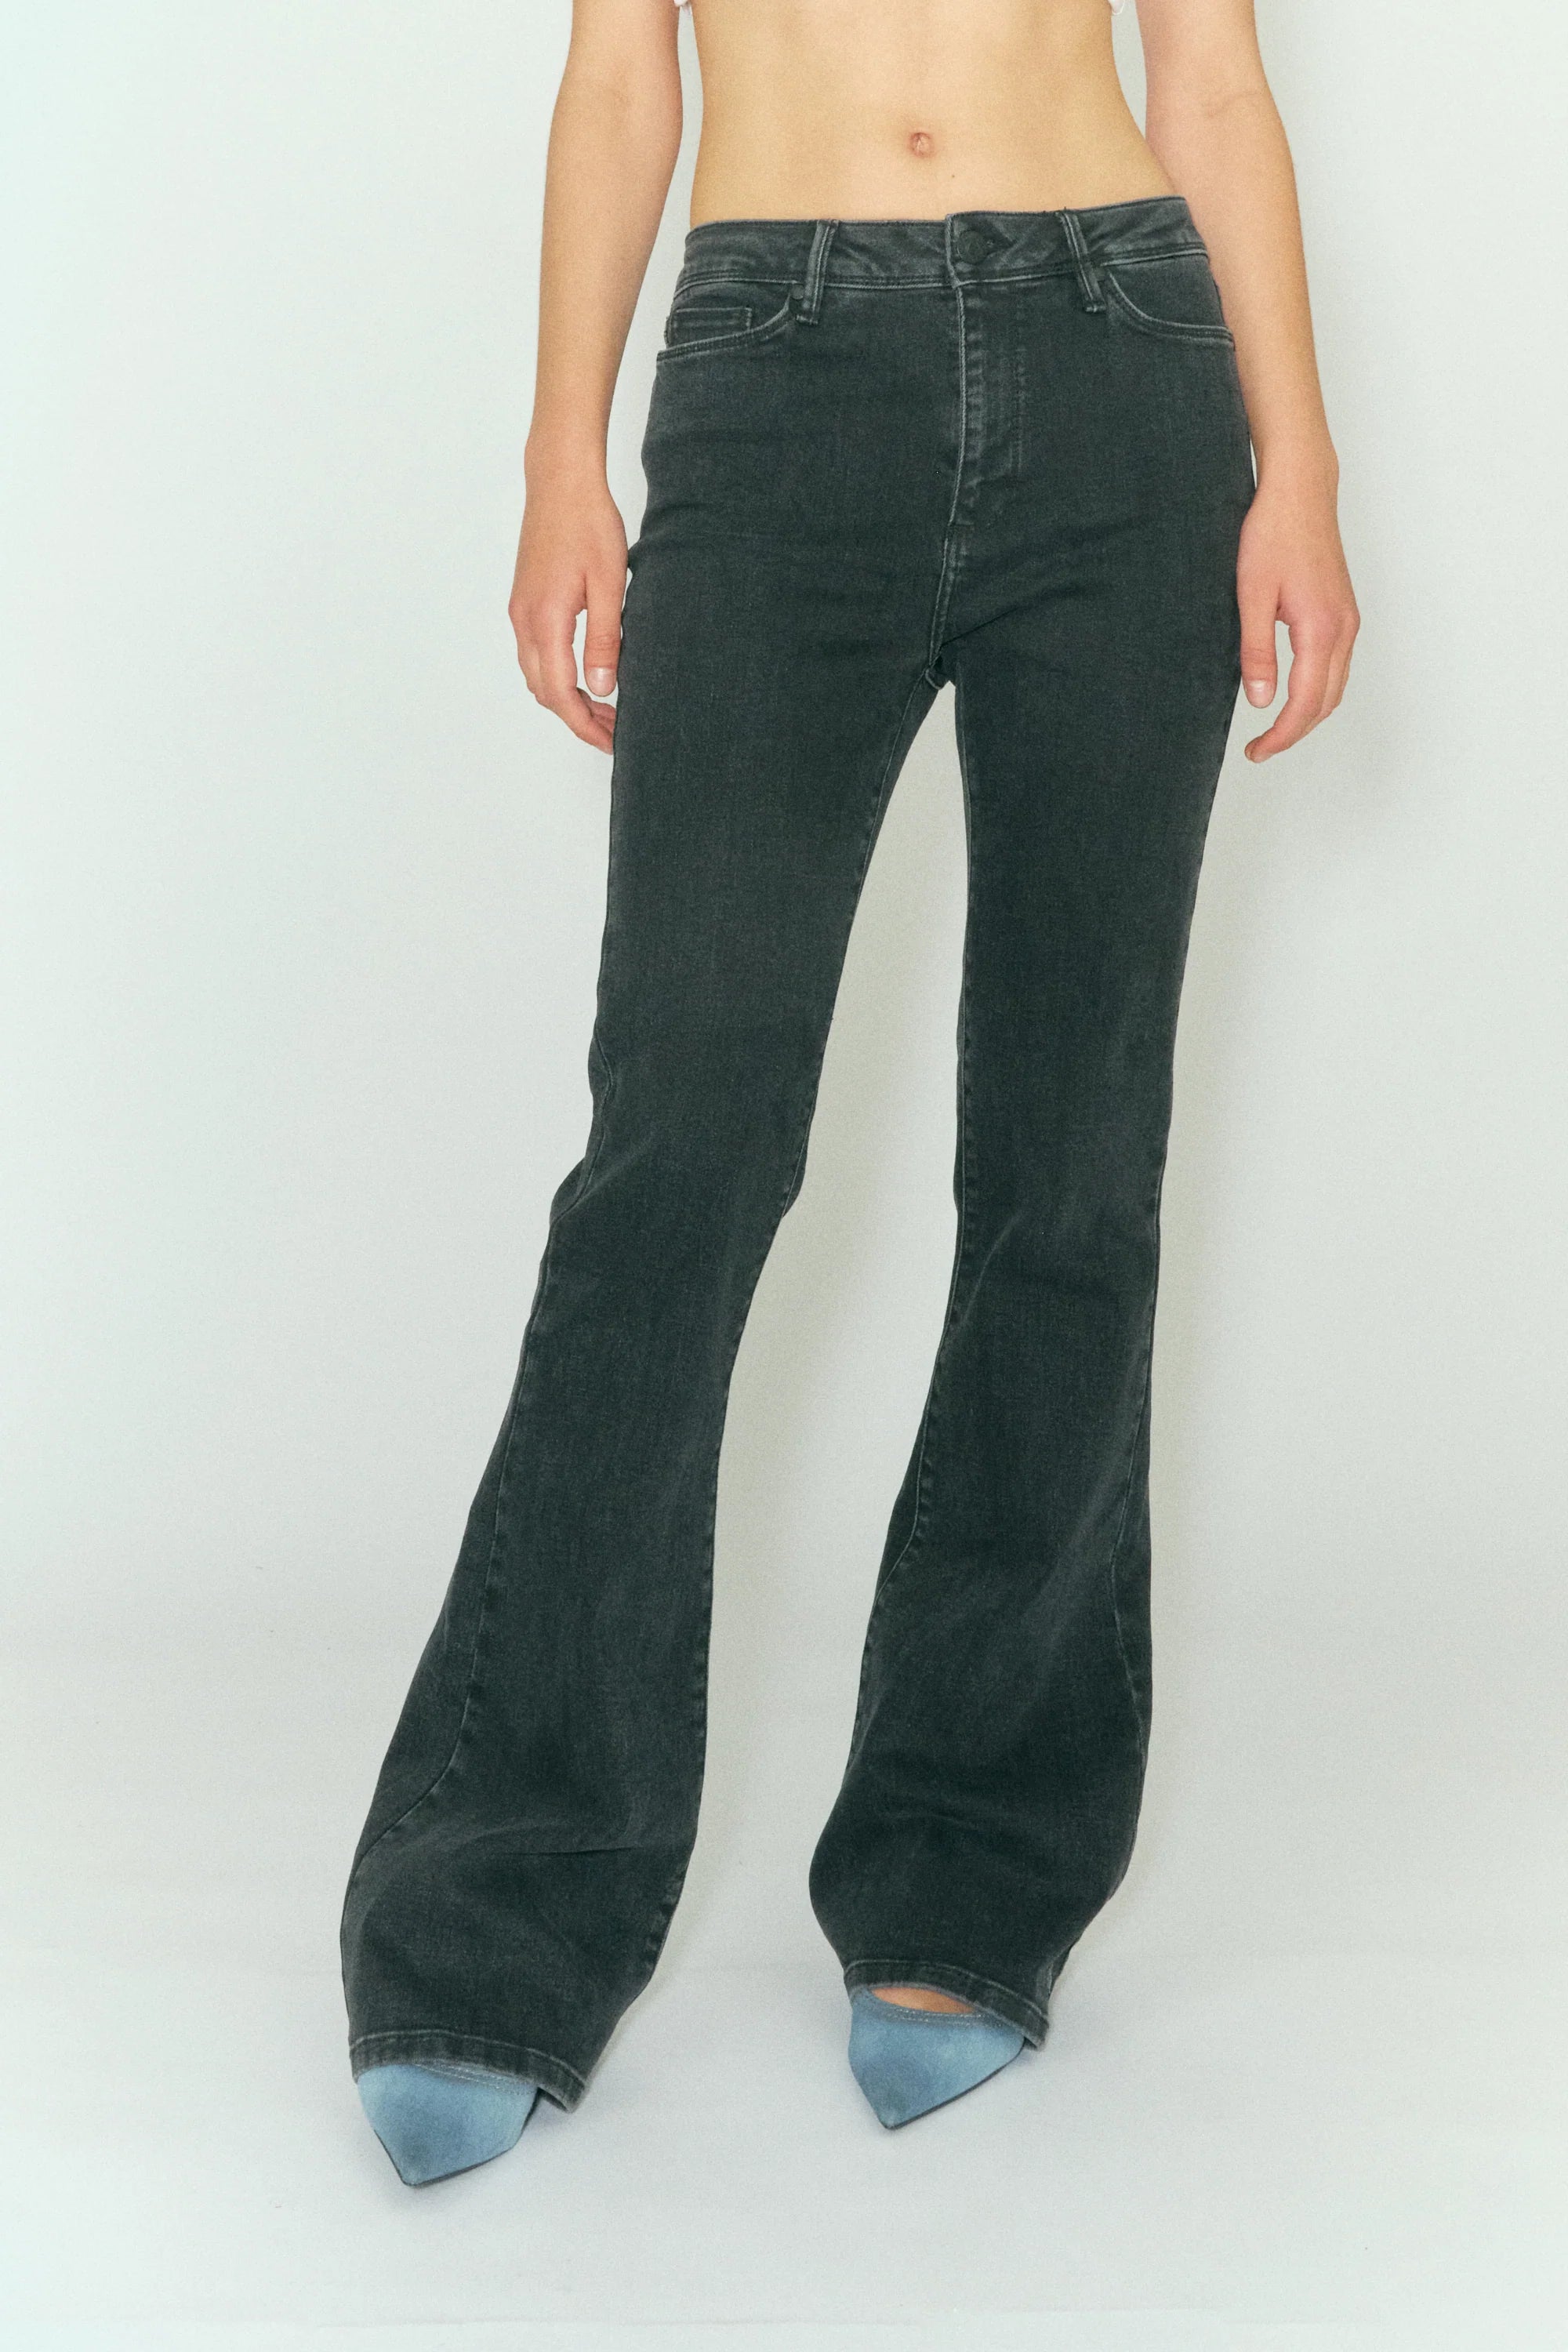 A woman in Tomorrow Denim's Albert Flare - Original Black high waist jeans with a flared hem posing for a photo.